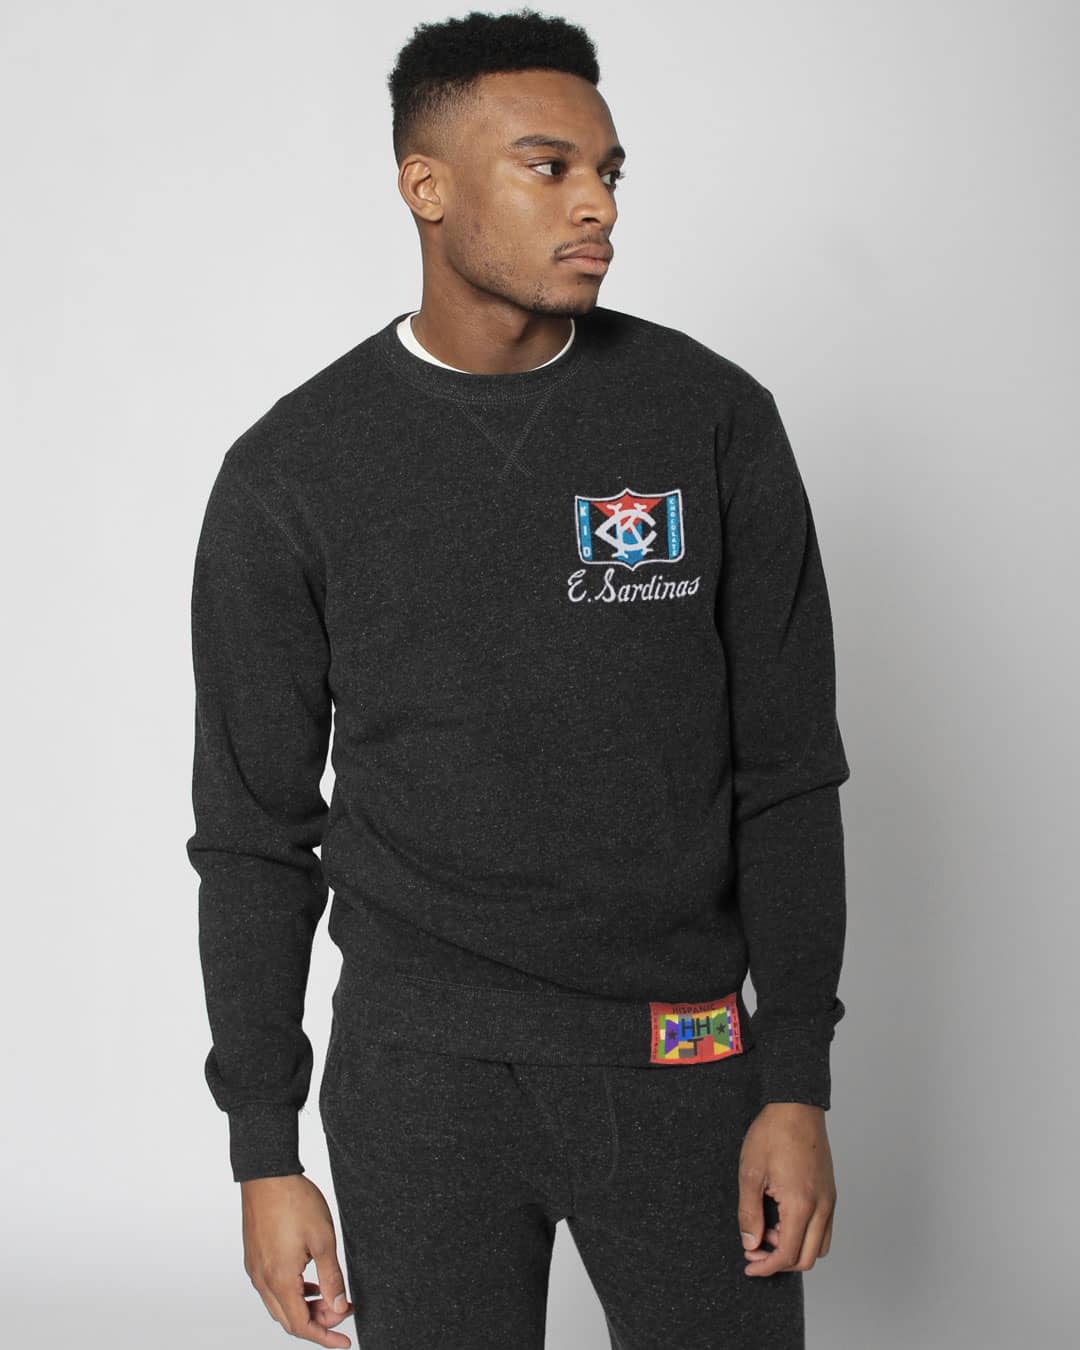 HHT - Kid Chocolate Super Soft Triblend Sweatshirt - Roots of Inc dba Roots of Fight